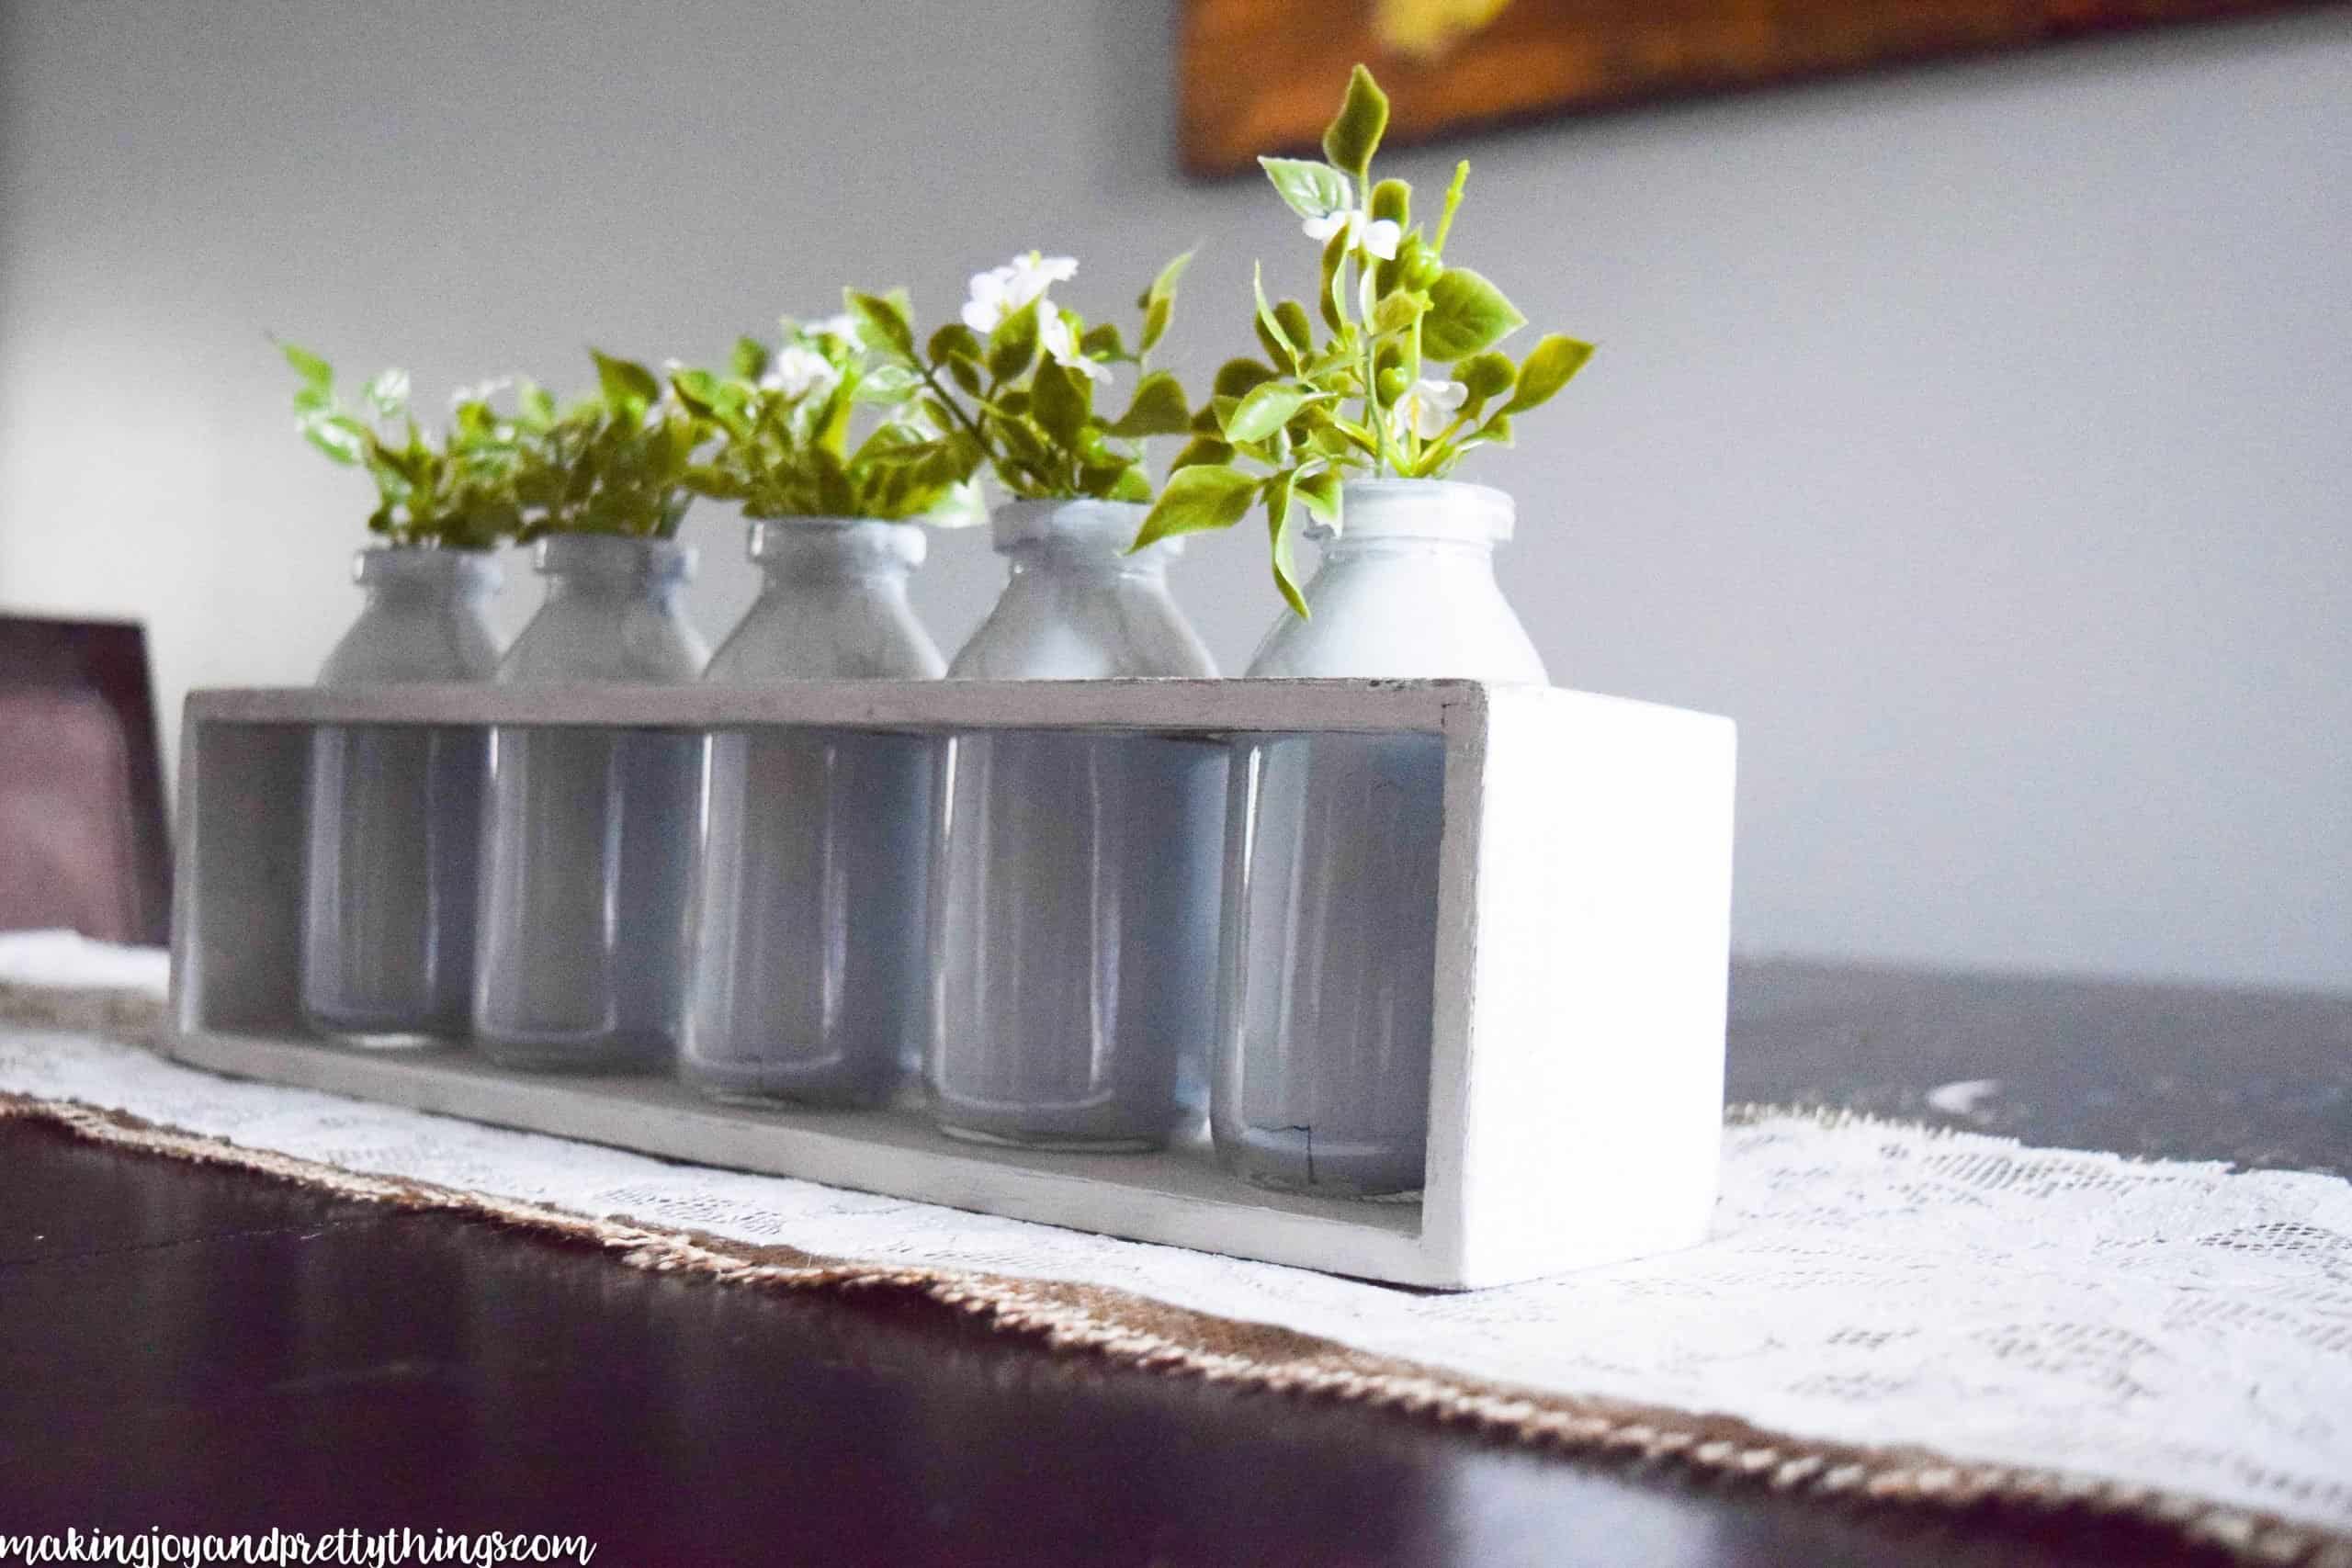 A side-view of the summer centerpiece, made from a white-painted wood box filled with five glass jars, each with sprigs of faux greenery and baby's breath flowers.